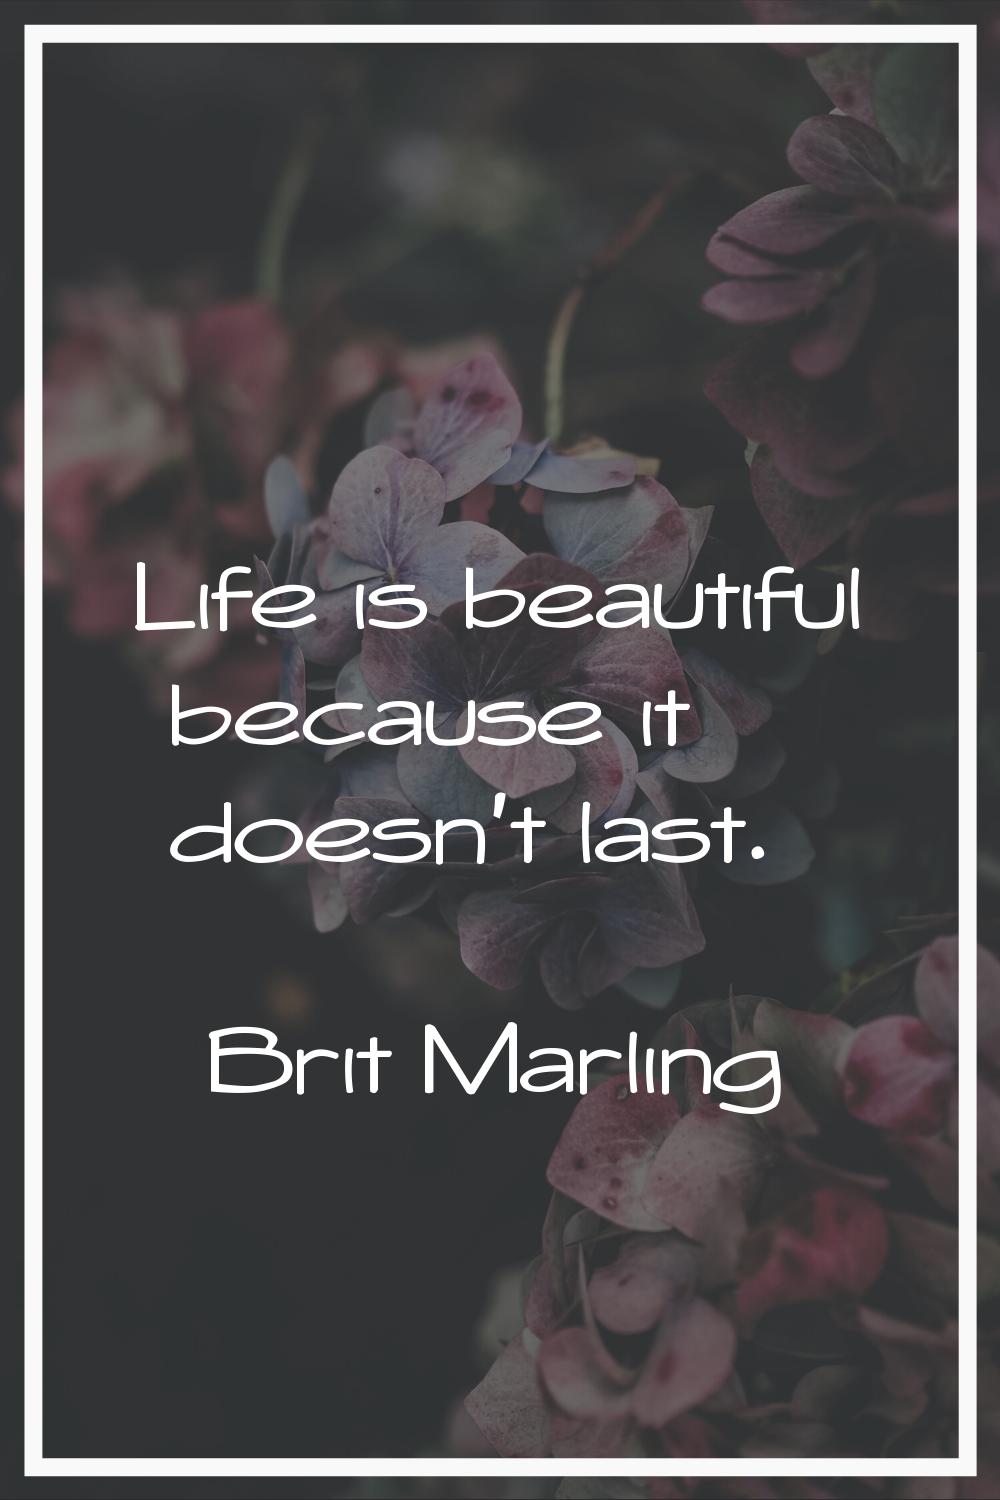 Life is beautiful because it doesn't last.